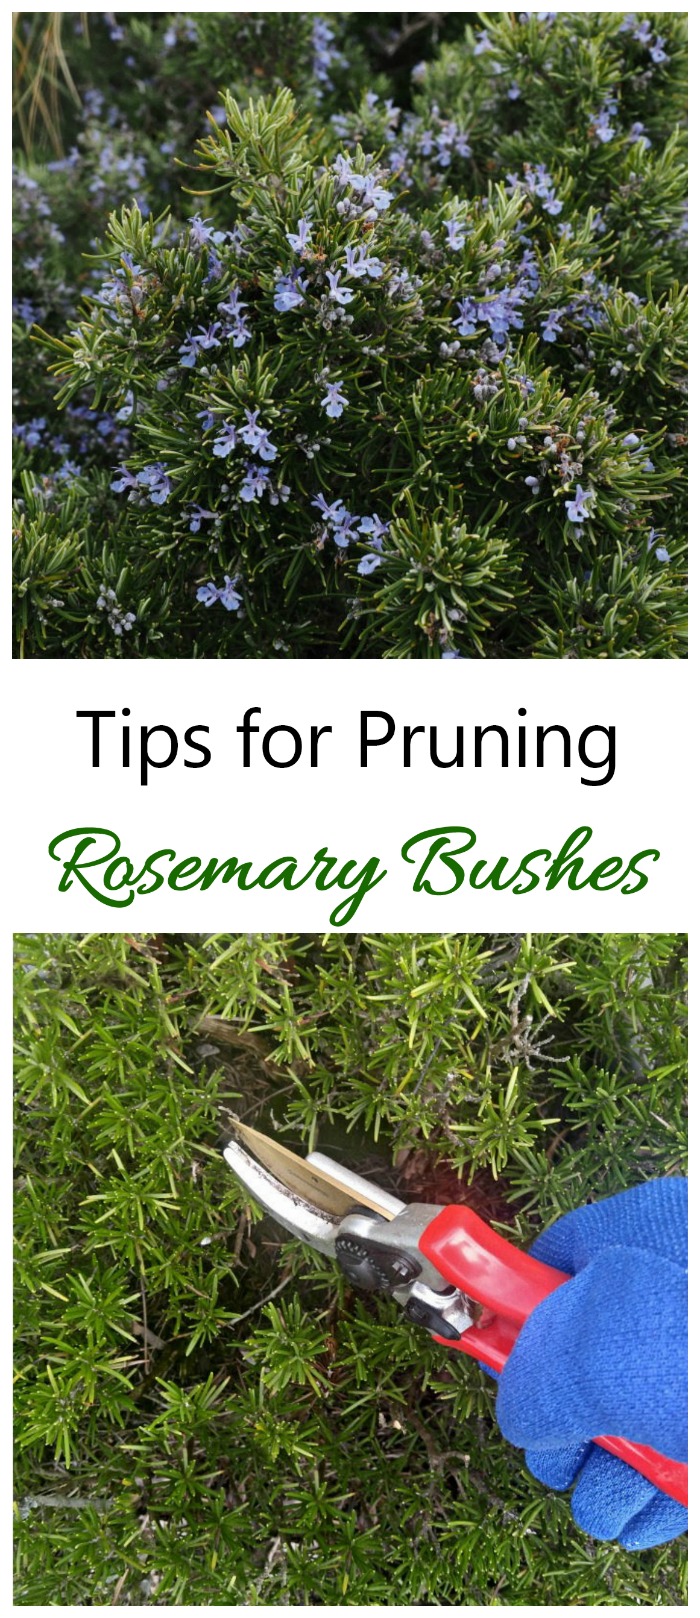 Pruning rosemary will make the plant more bushy and productive. It's easy if you follow a few tips. #pruningplants #rosemary